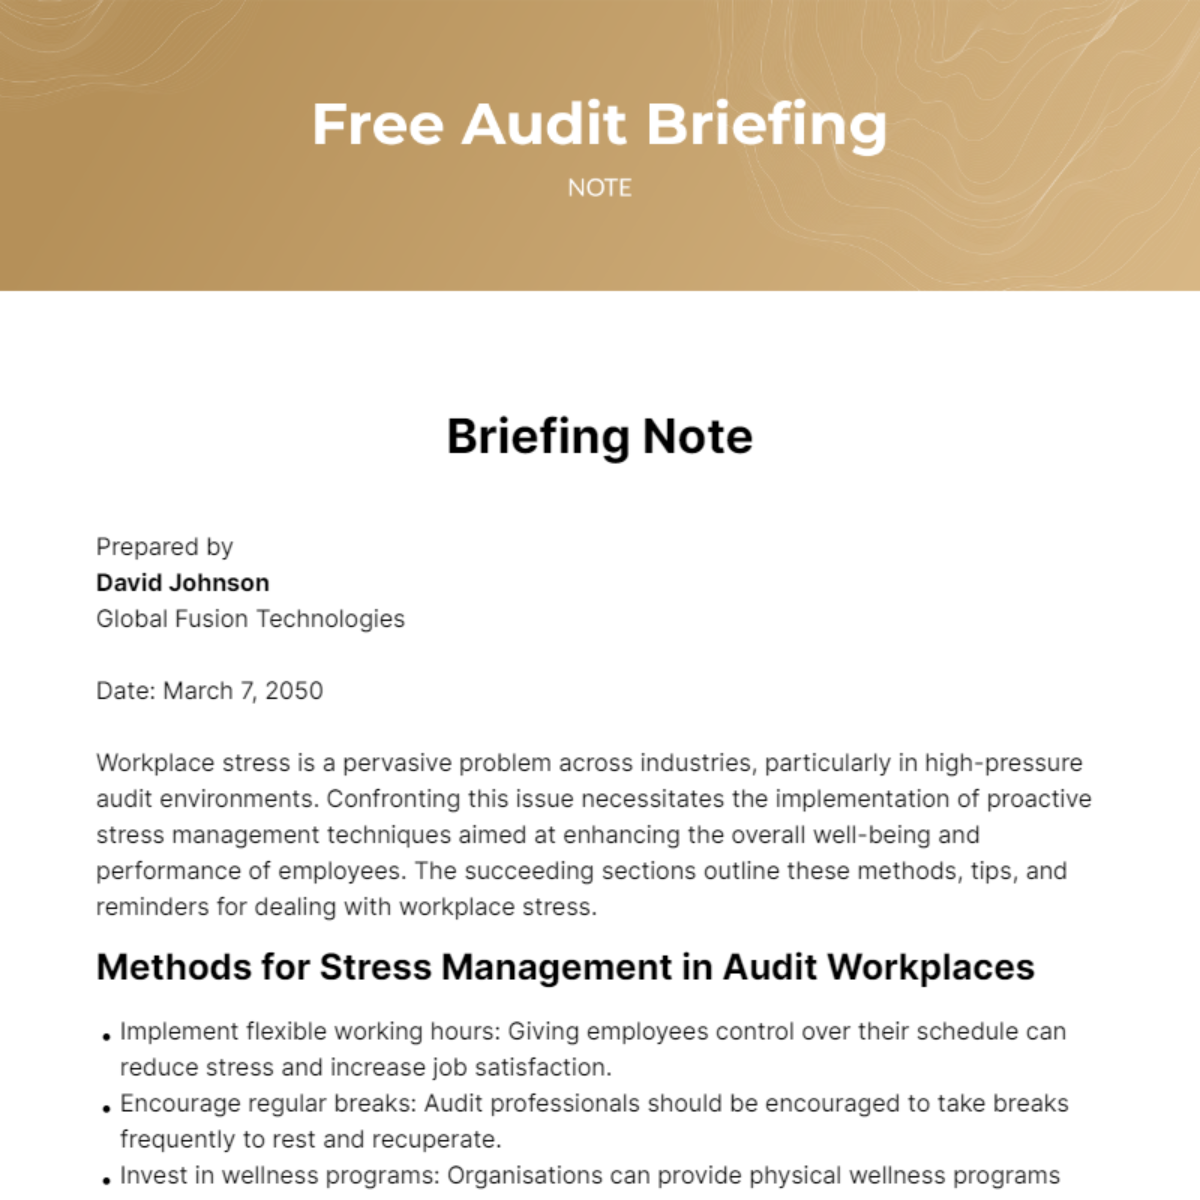 Free Audit Briefing Note Template